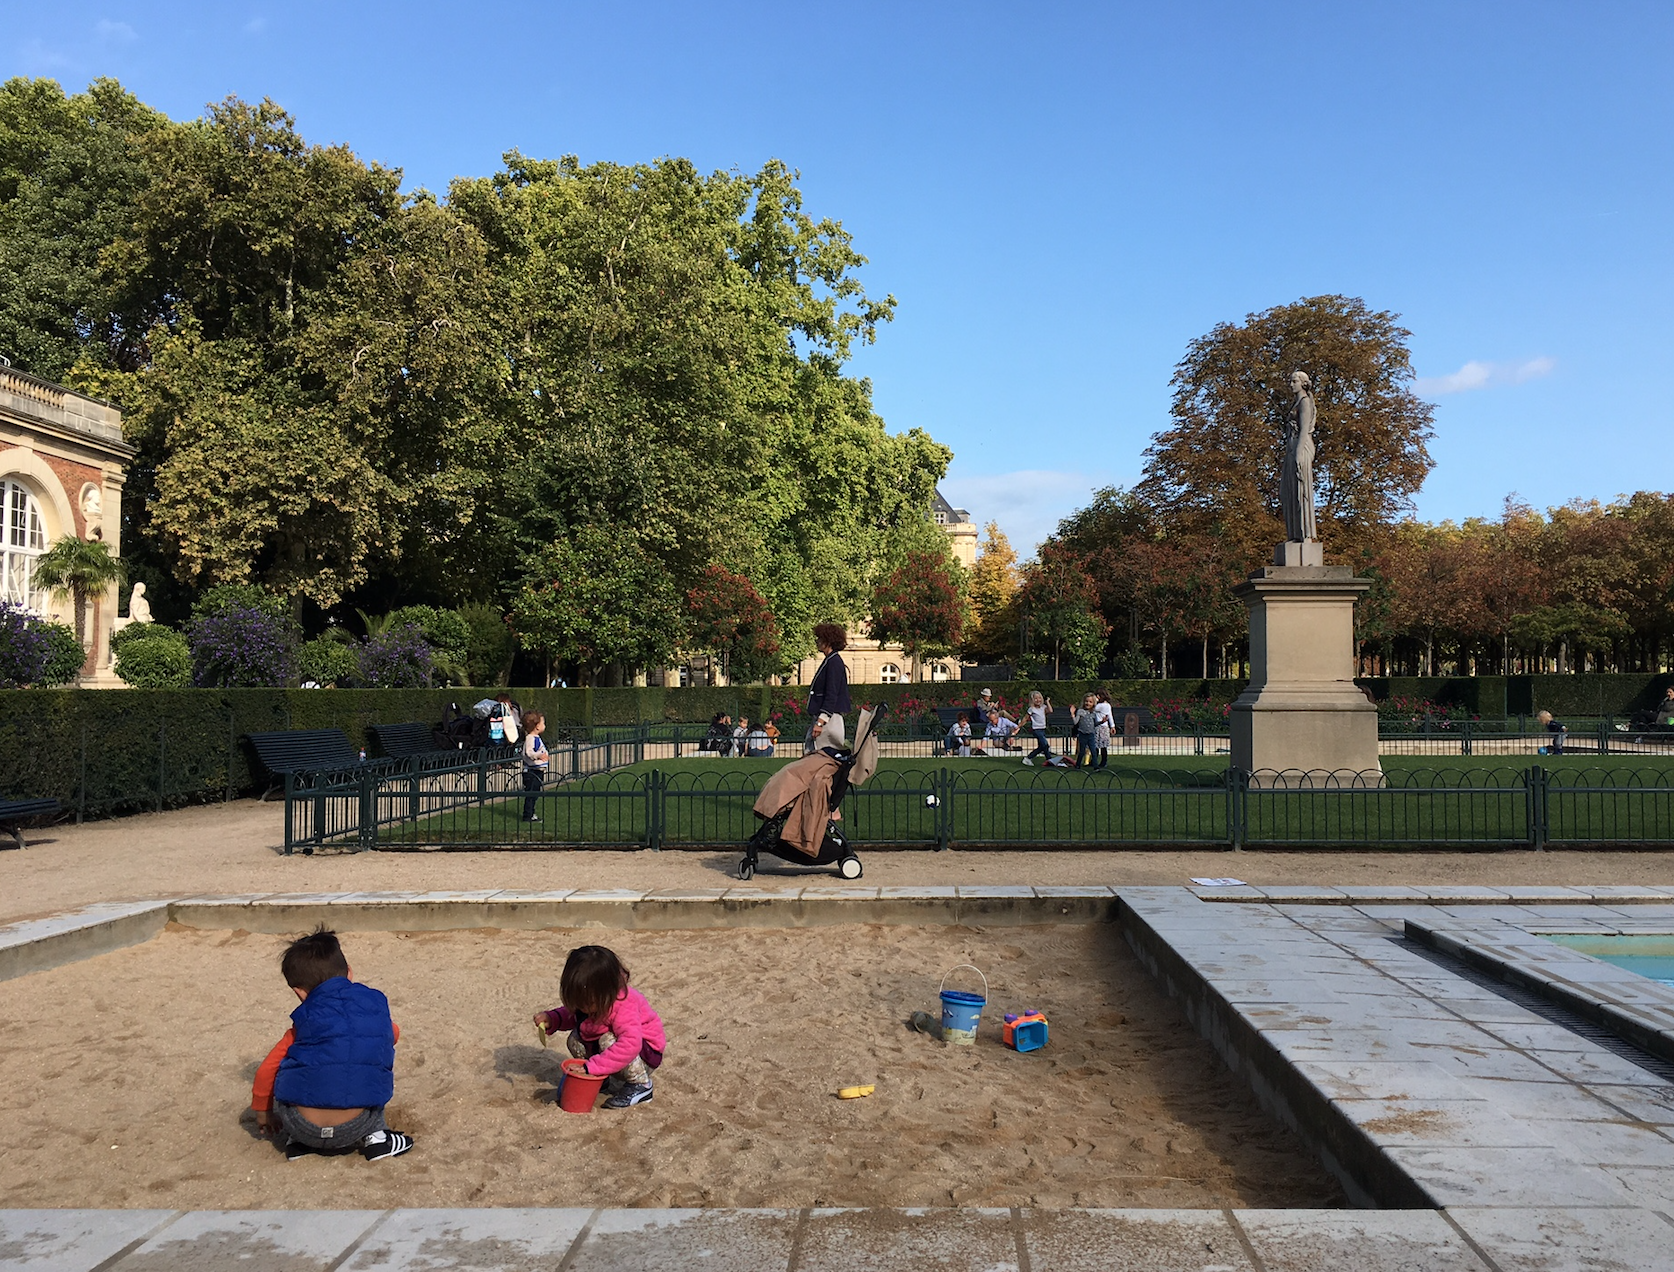 a group of kids playing in sand in a park